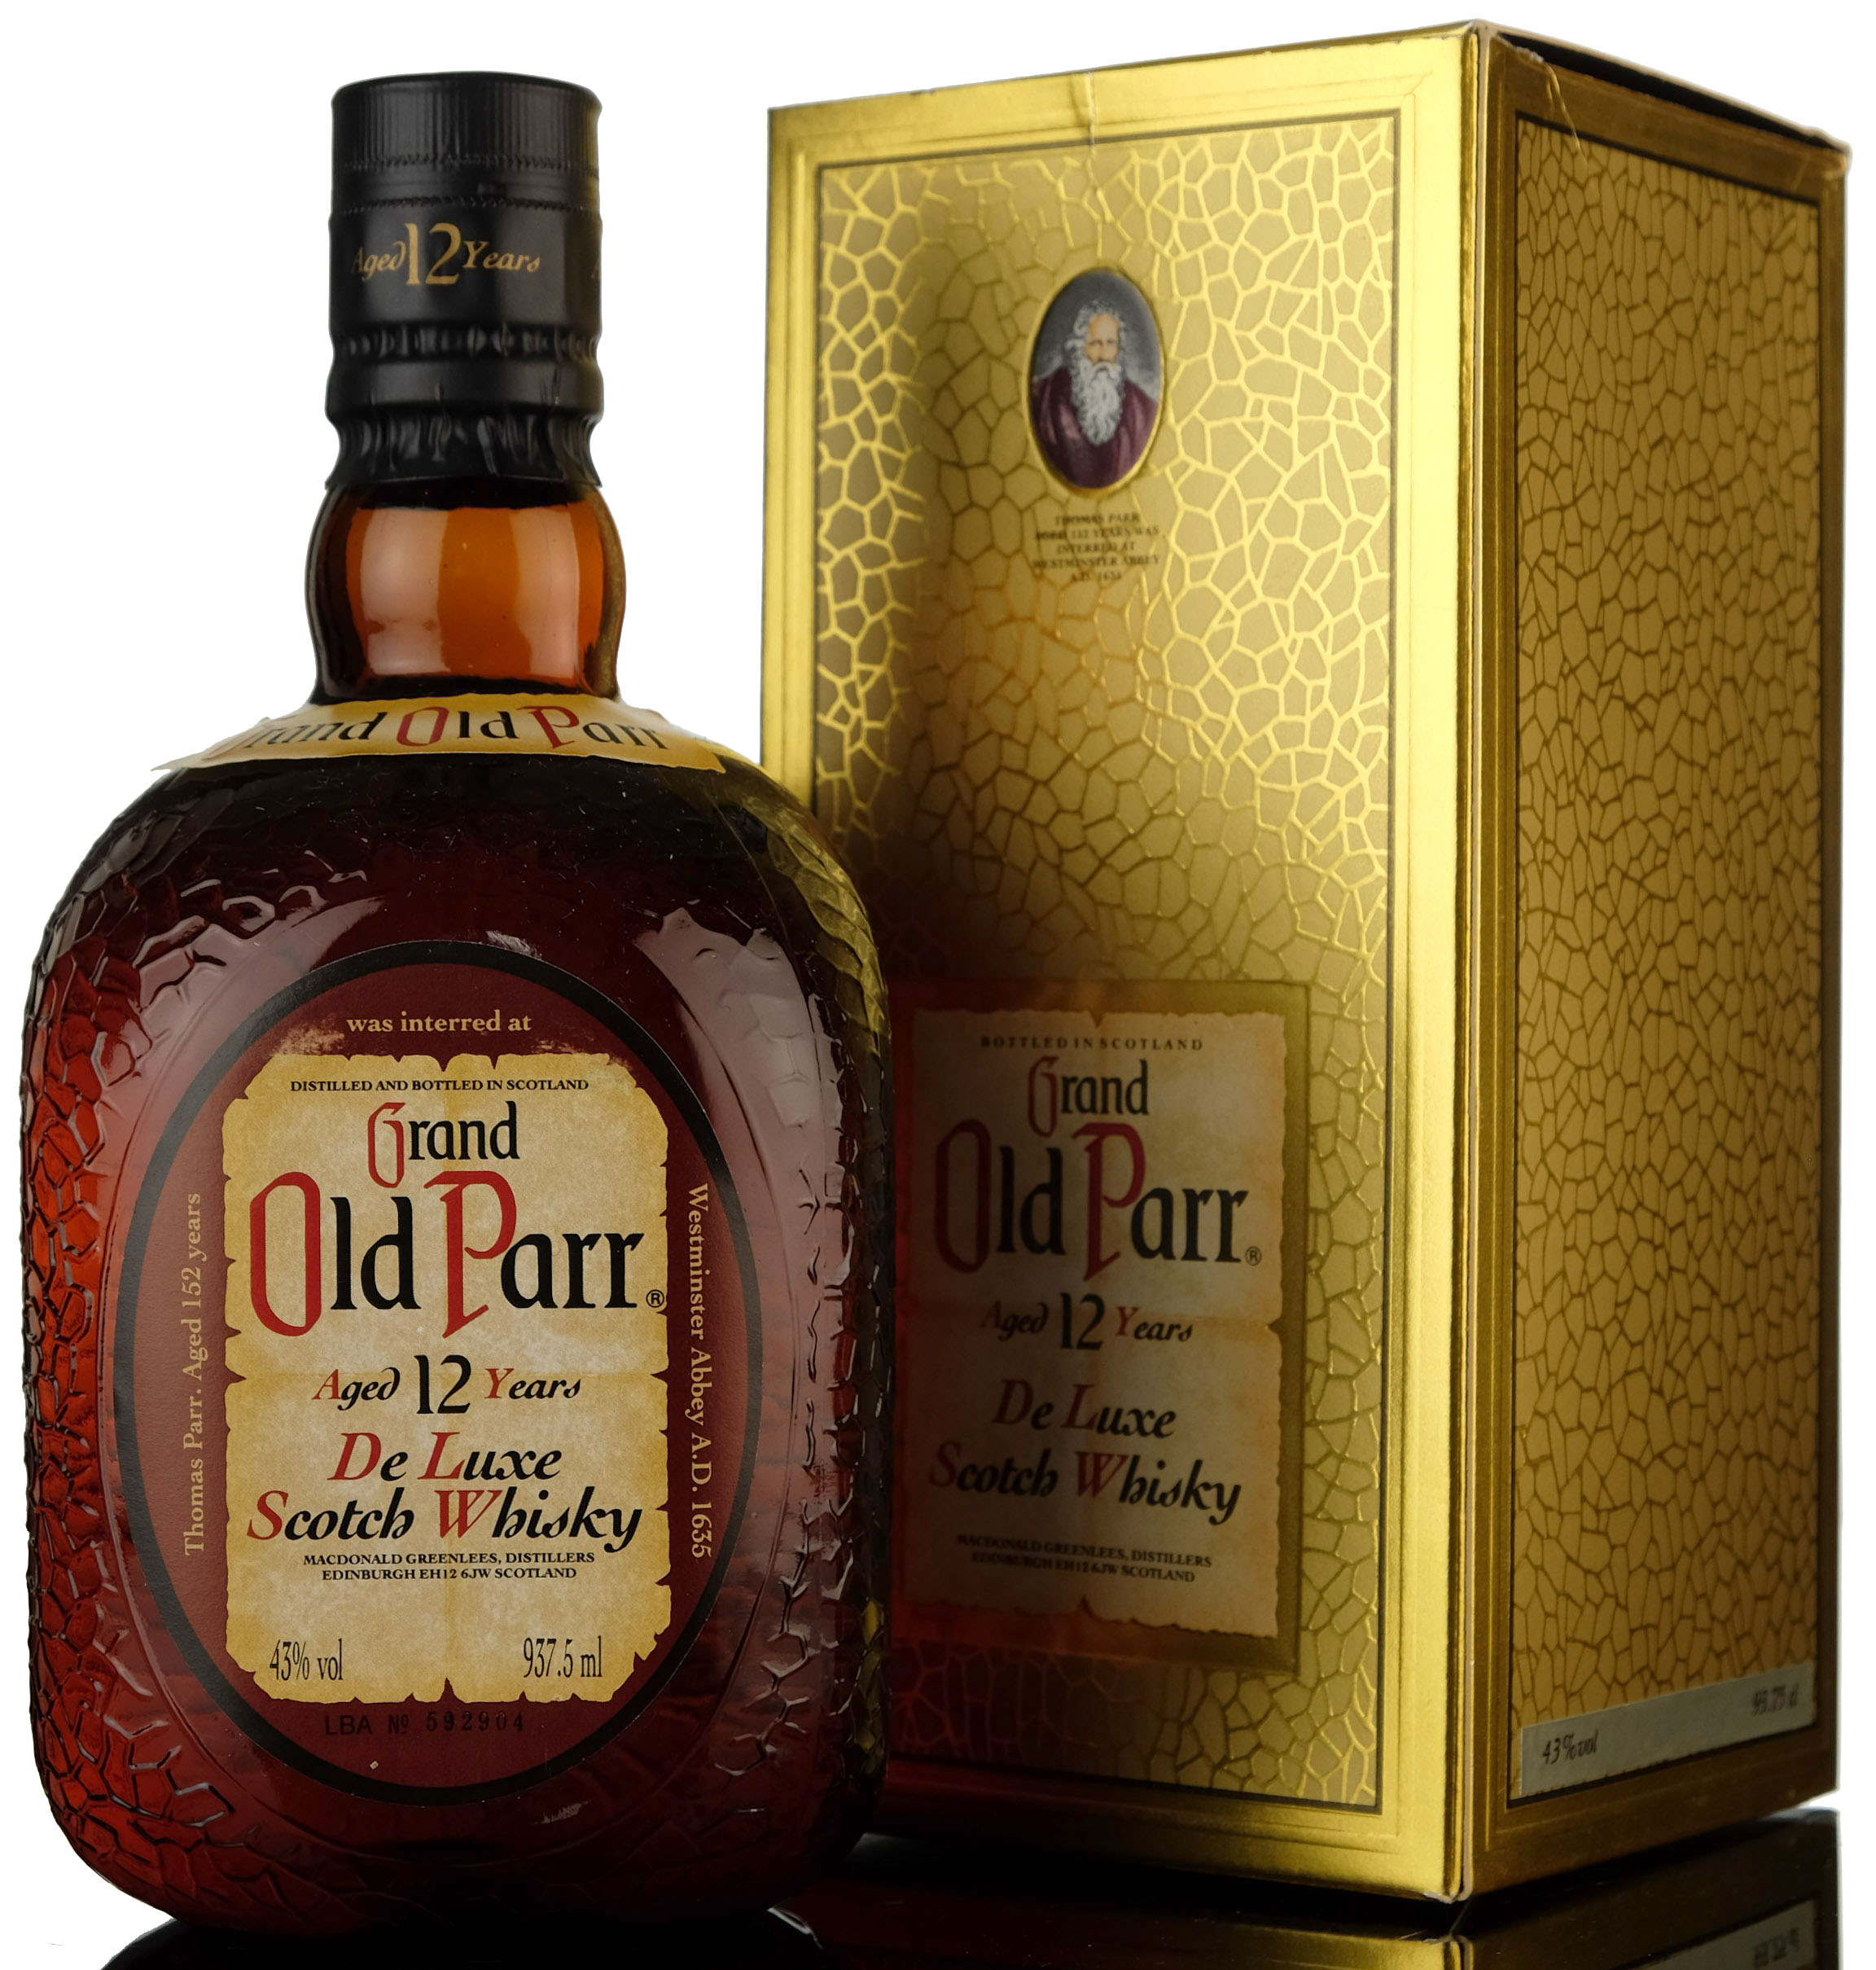 Grand Old Parr 12 Year Old - De Luxe - 1990s - 937.5ml